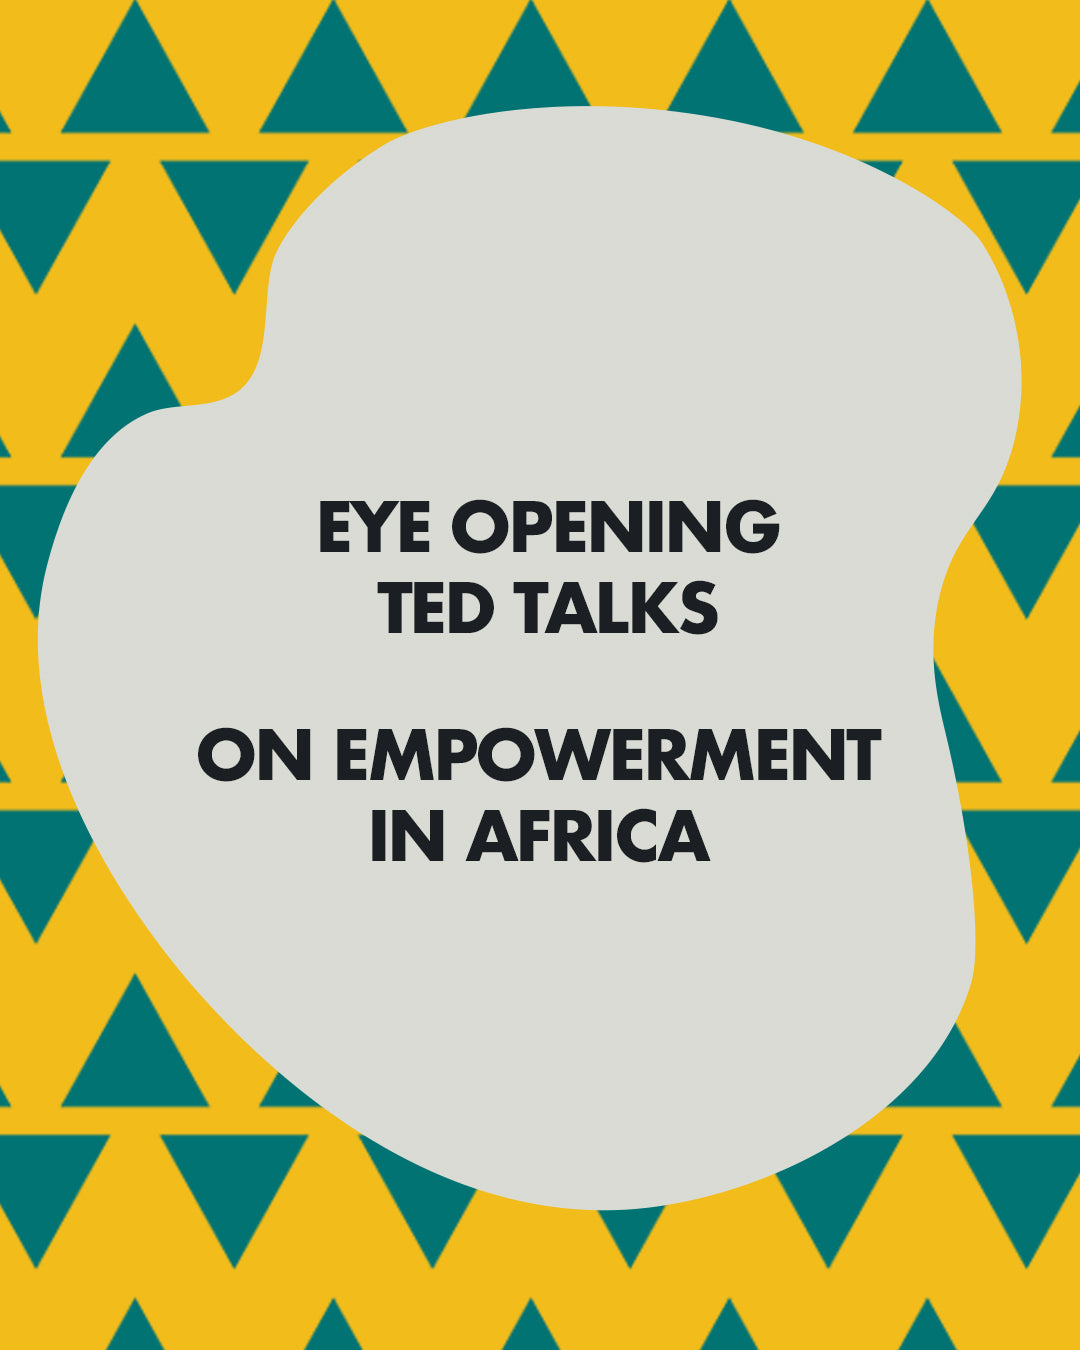 7 TEDTalks About Empowerment in Africa To Watch This Week